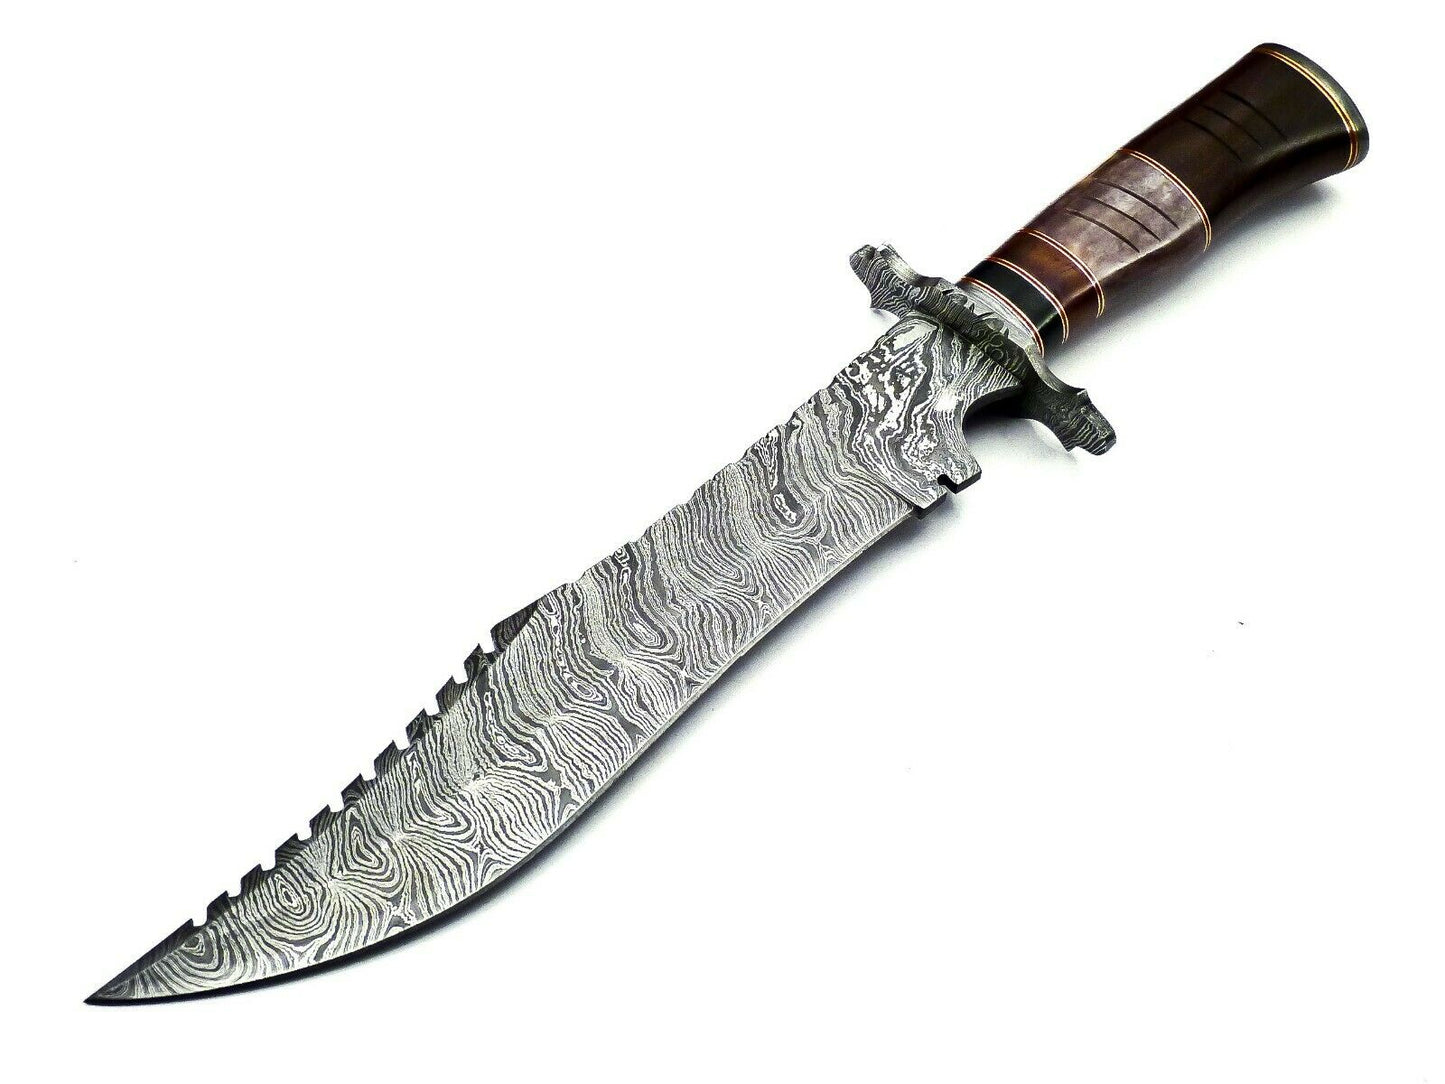 Handmade Damascus Steel 15 Inches Bowie Knife - Rose Wood & Bull Horn Handle